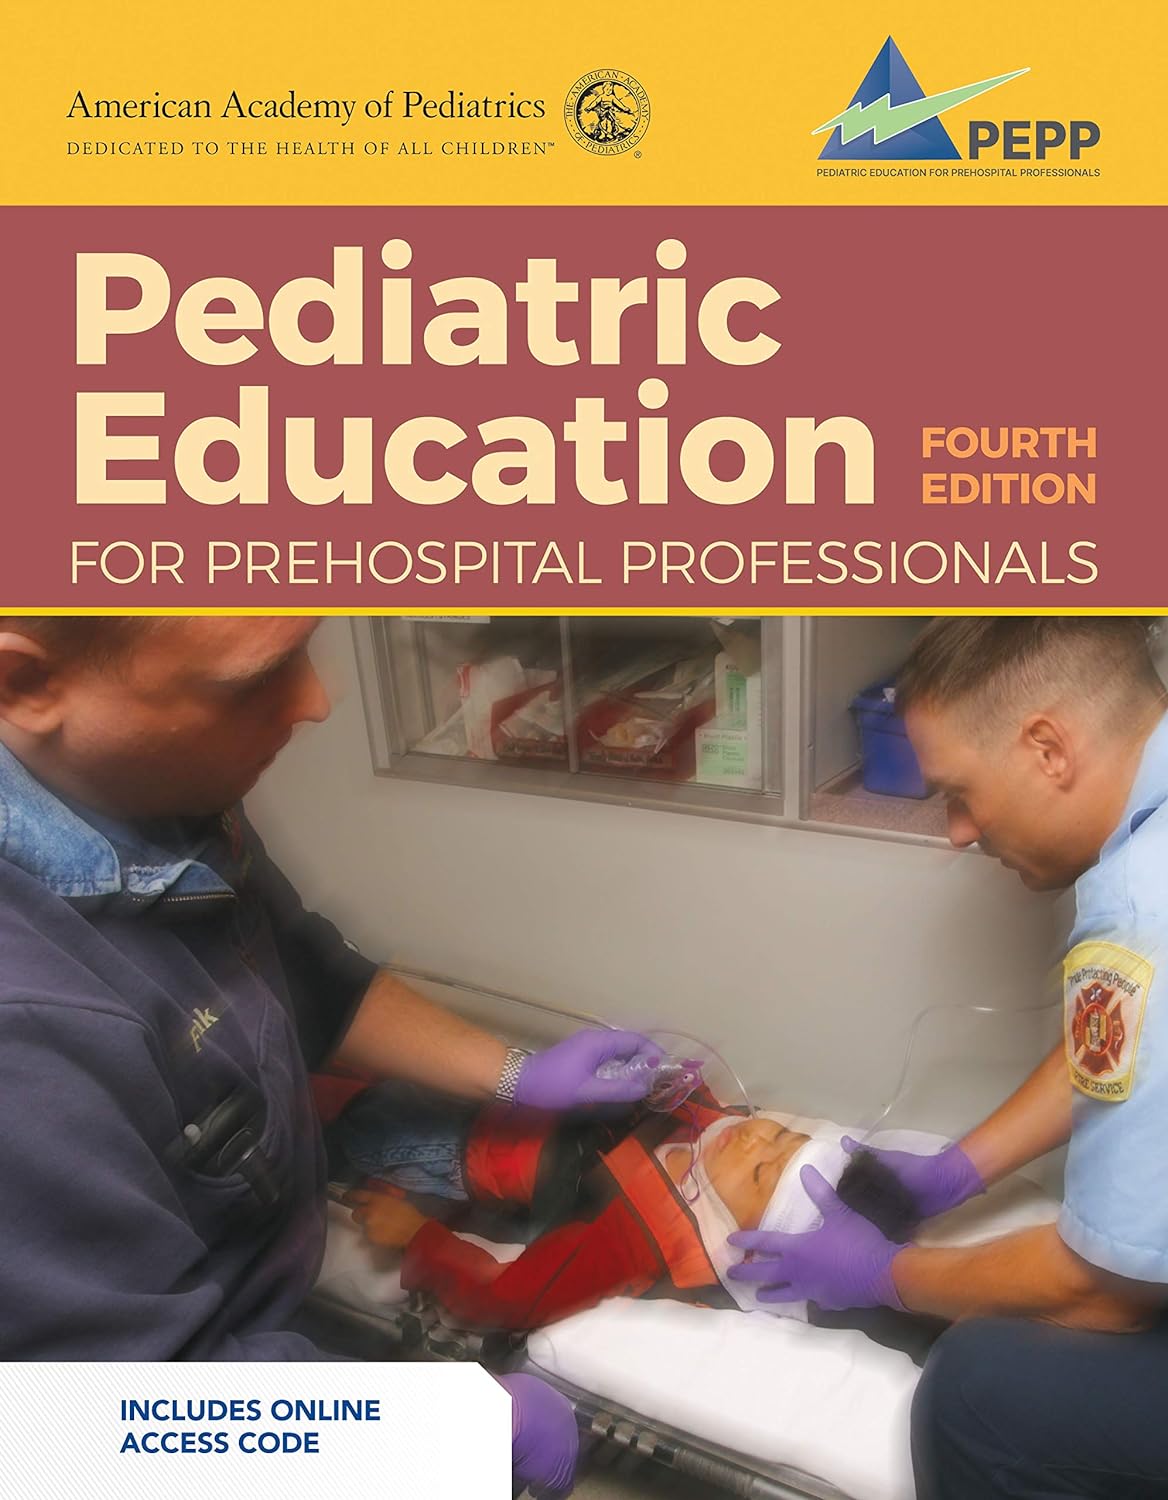 Pediatric Education for Prehospital Professionals (PEPP), Fourth Edition by American Academy of Pediatrics (AAP)